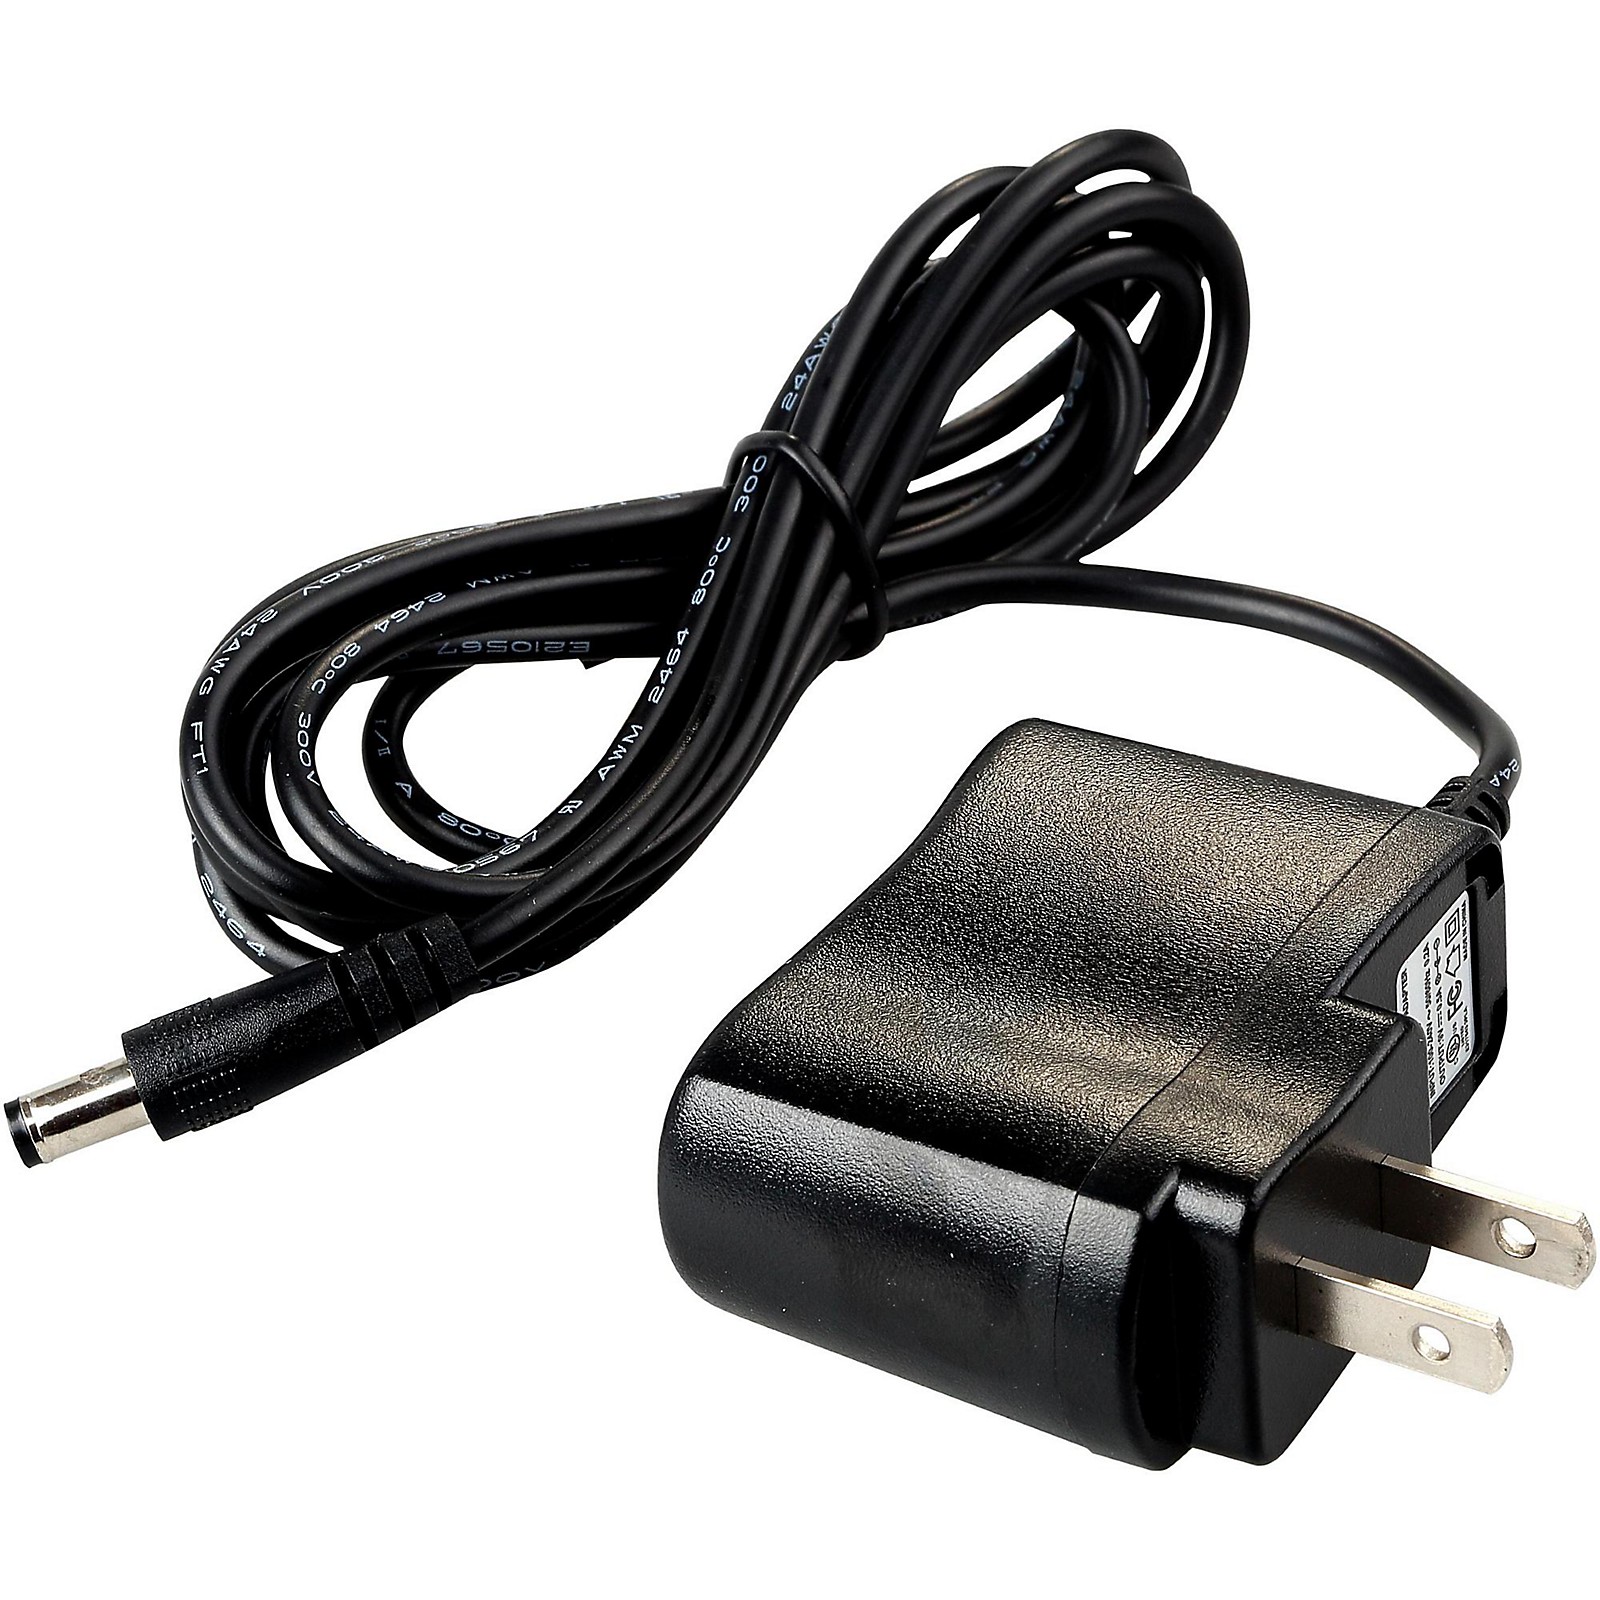 Monoprice 9V Power Supply for Guitar Pedals 